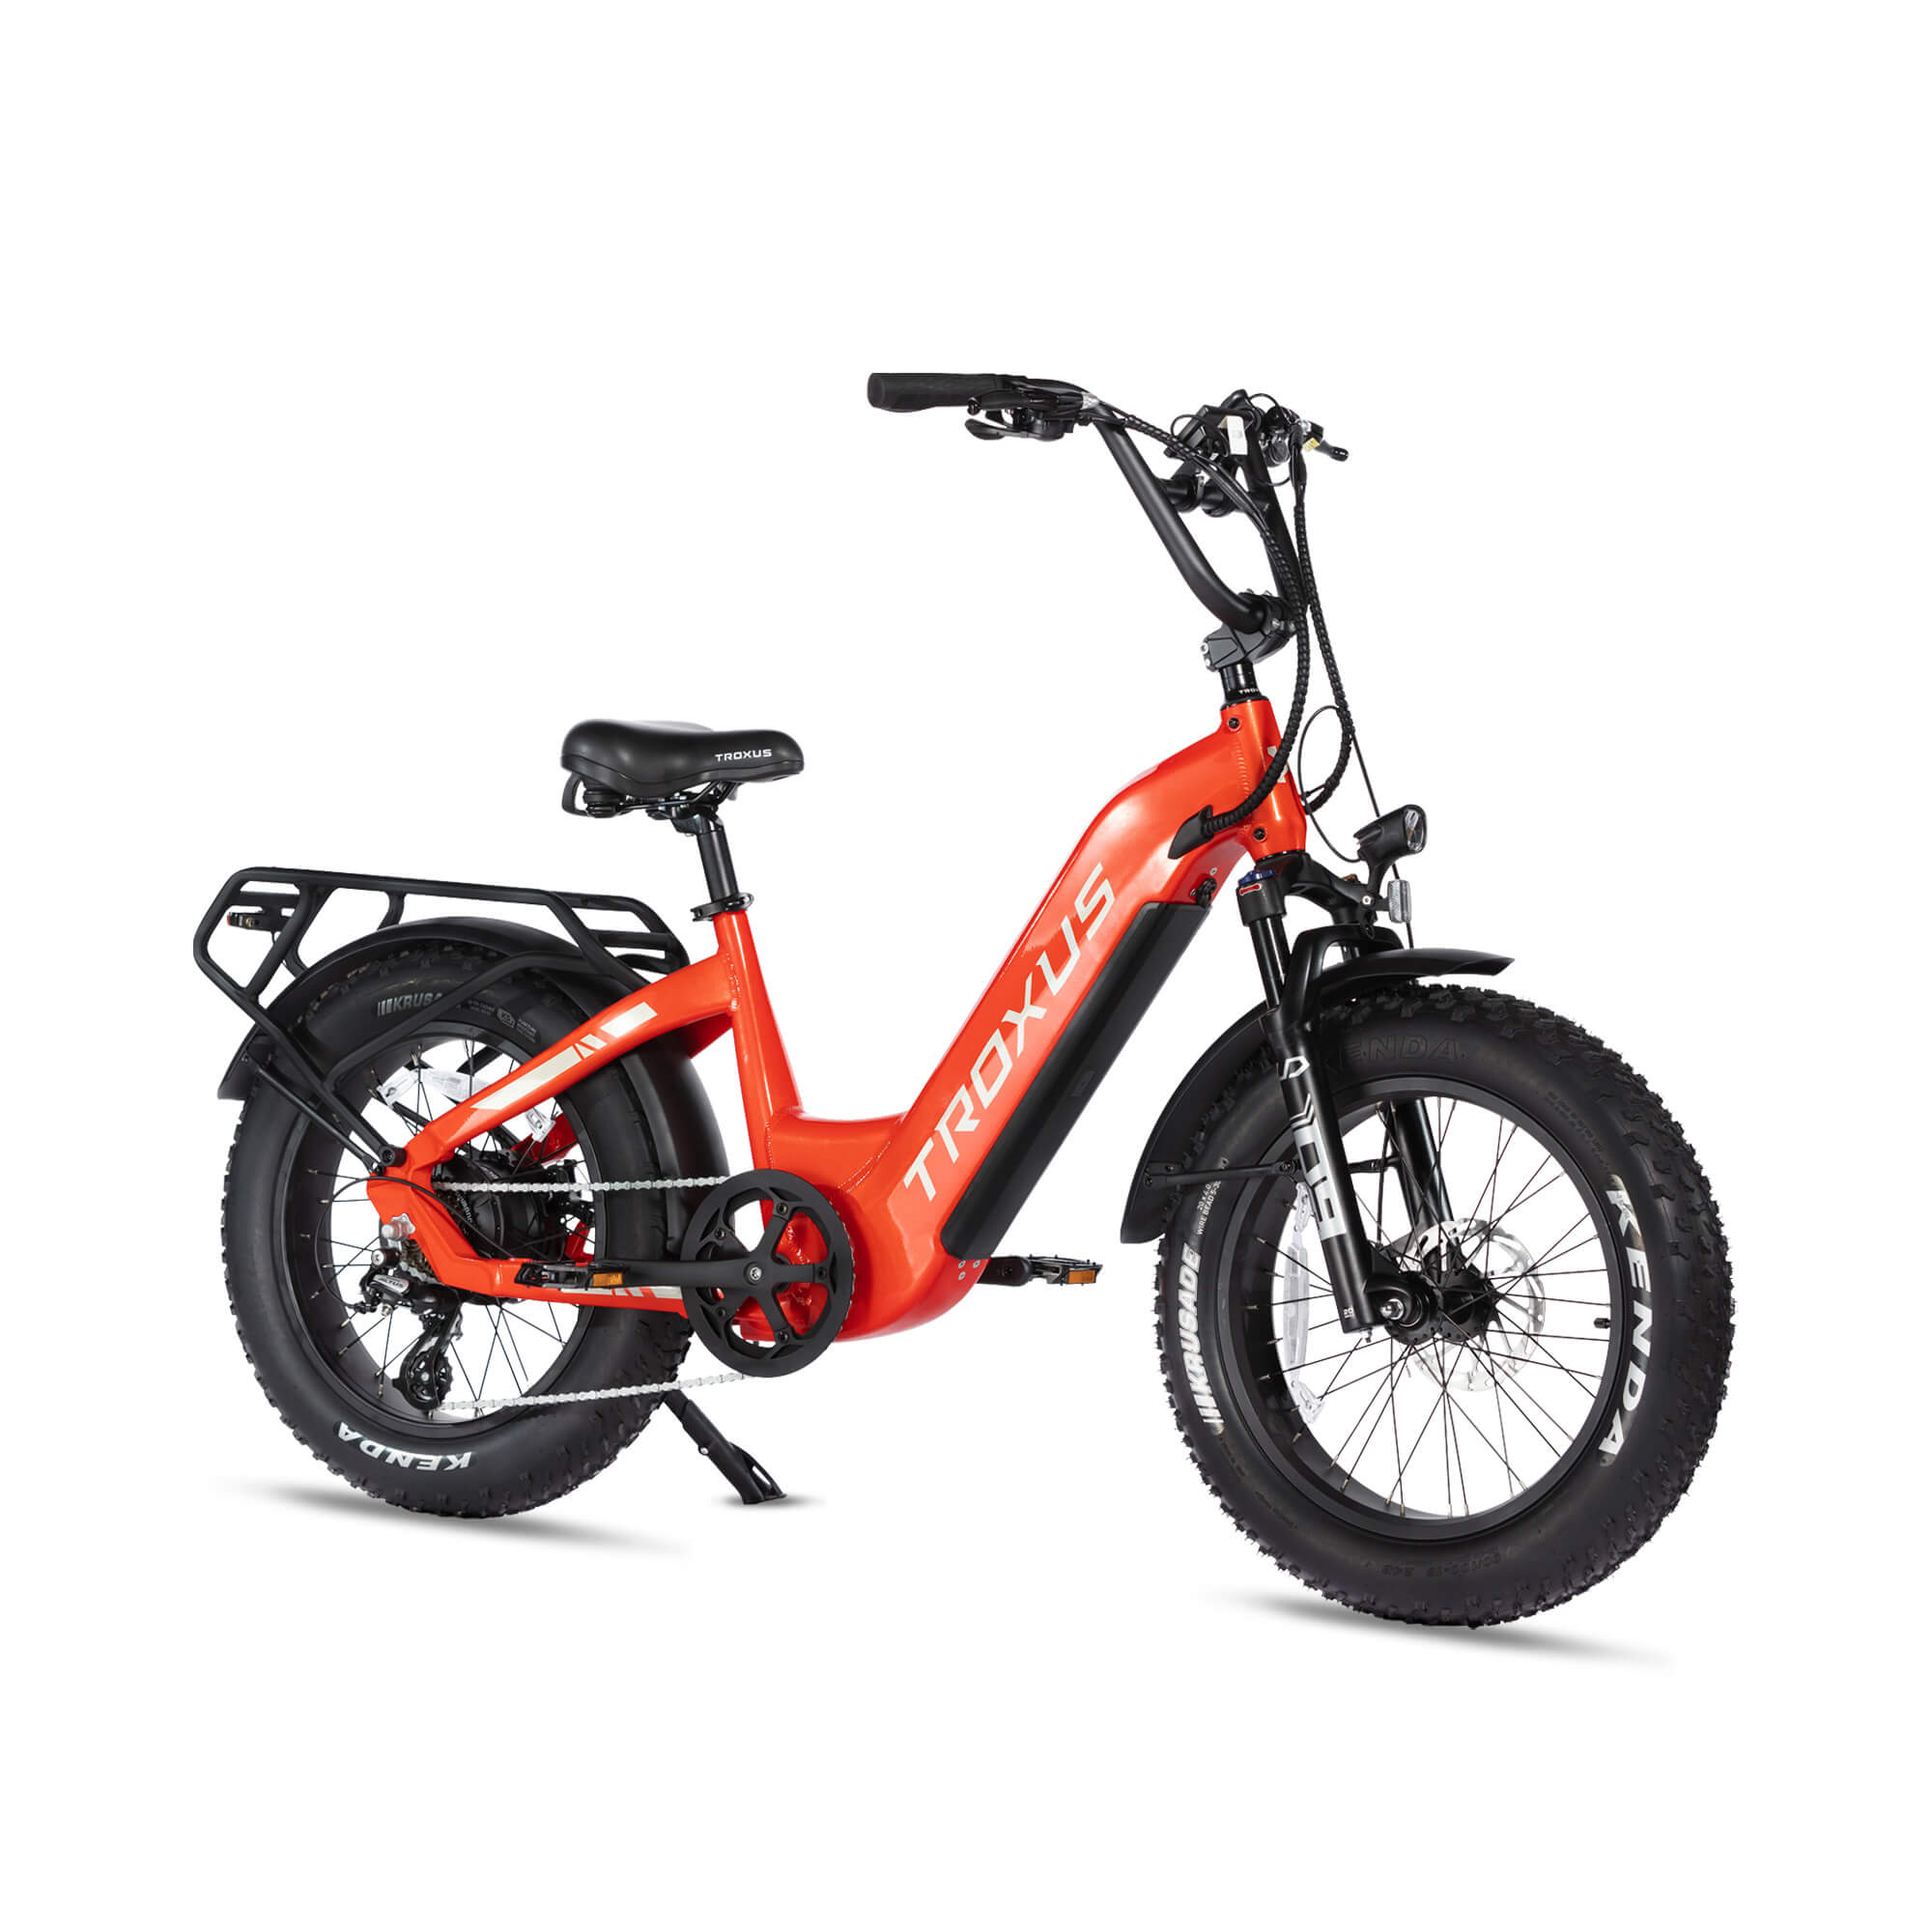 RZOGUWEX Electric Bicycle，20 Inch Off-Road EBIKE for Adults with